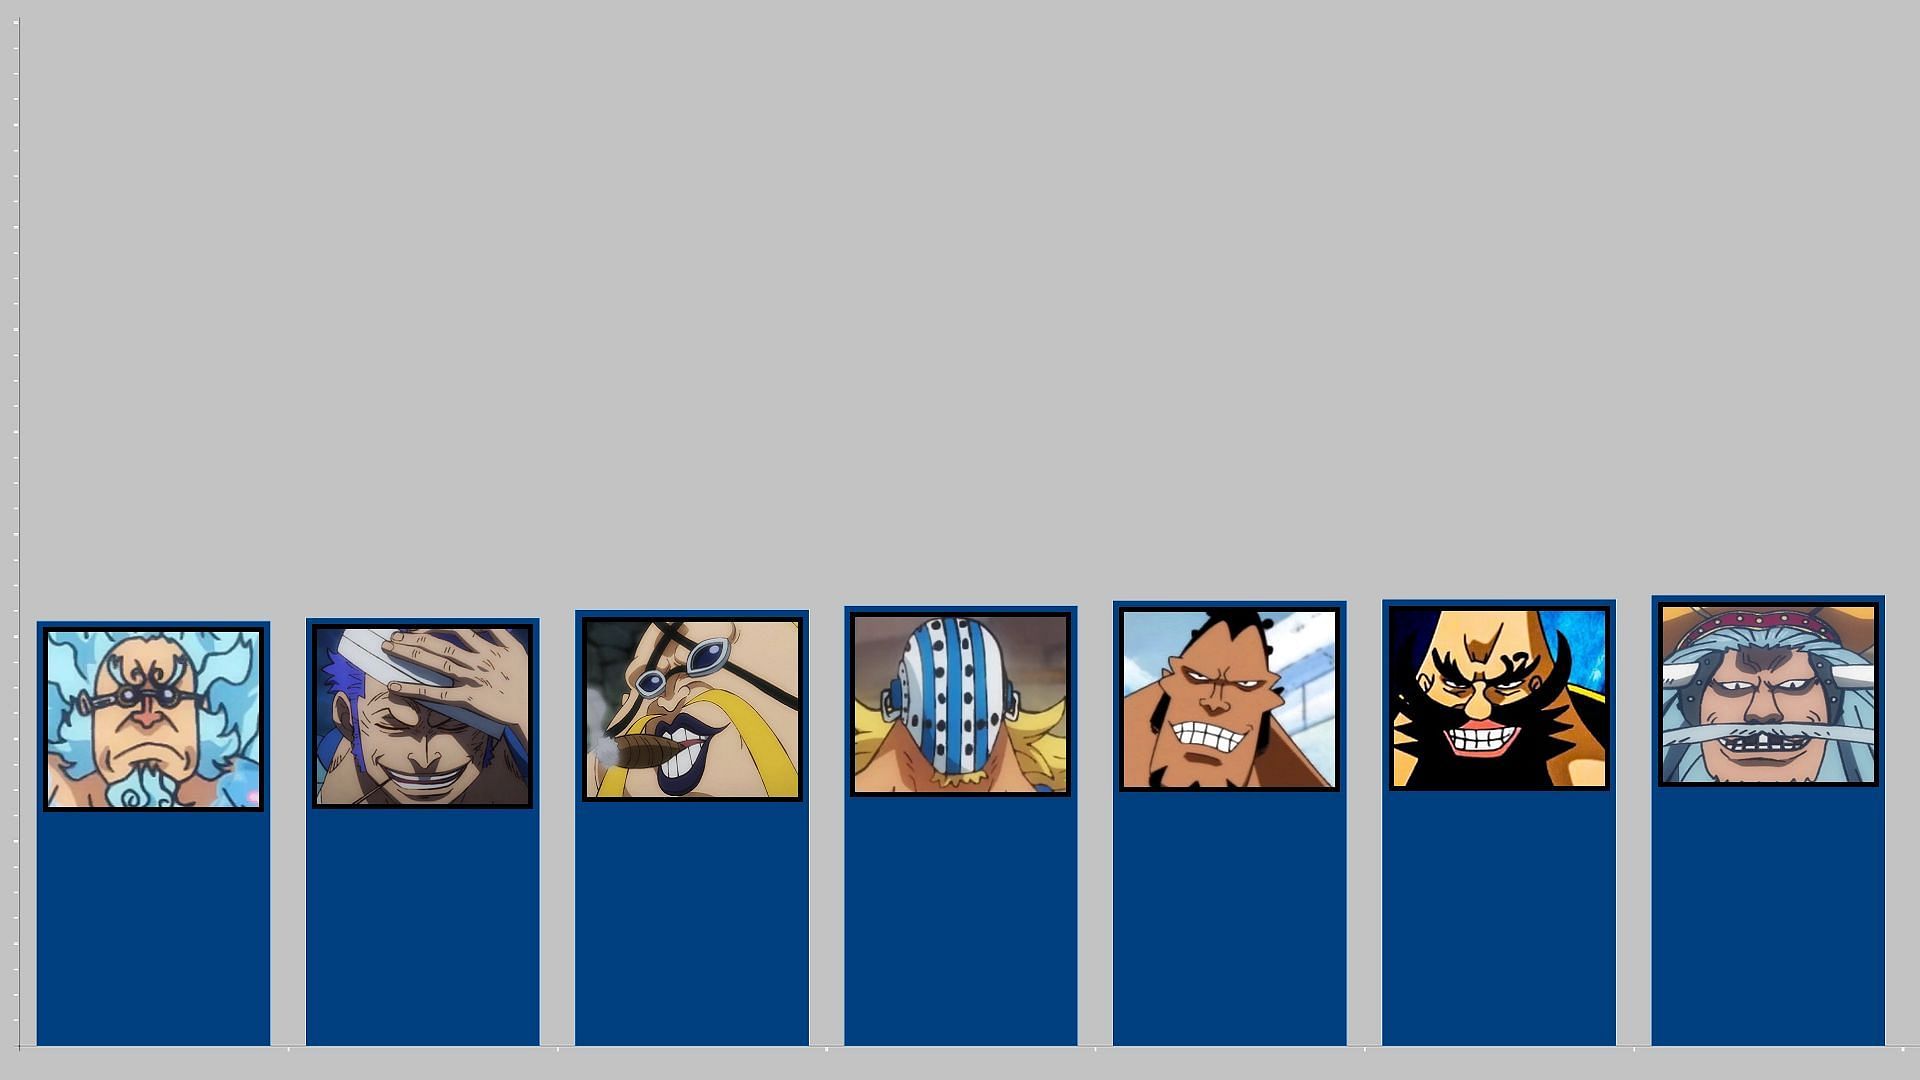 Left to right, positions from 70th to 64th (Image via Toei Animation, One Piece)